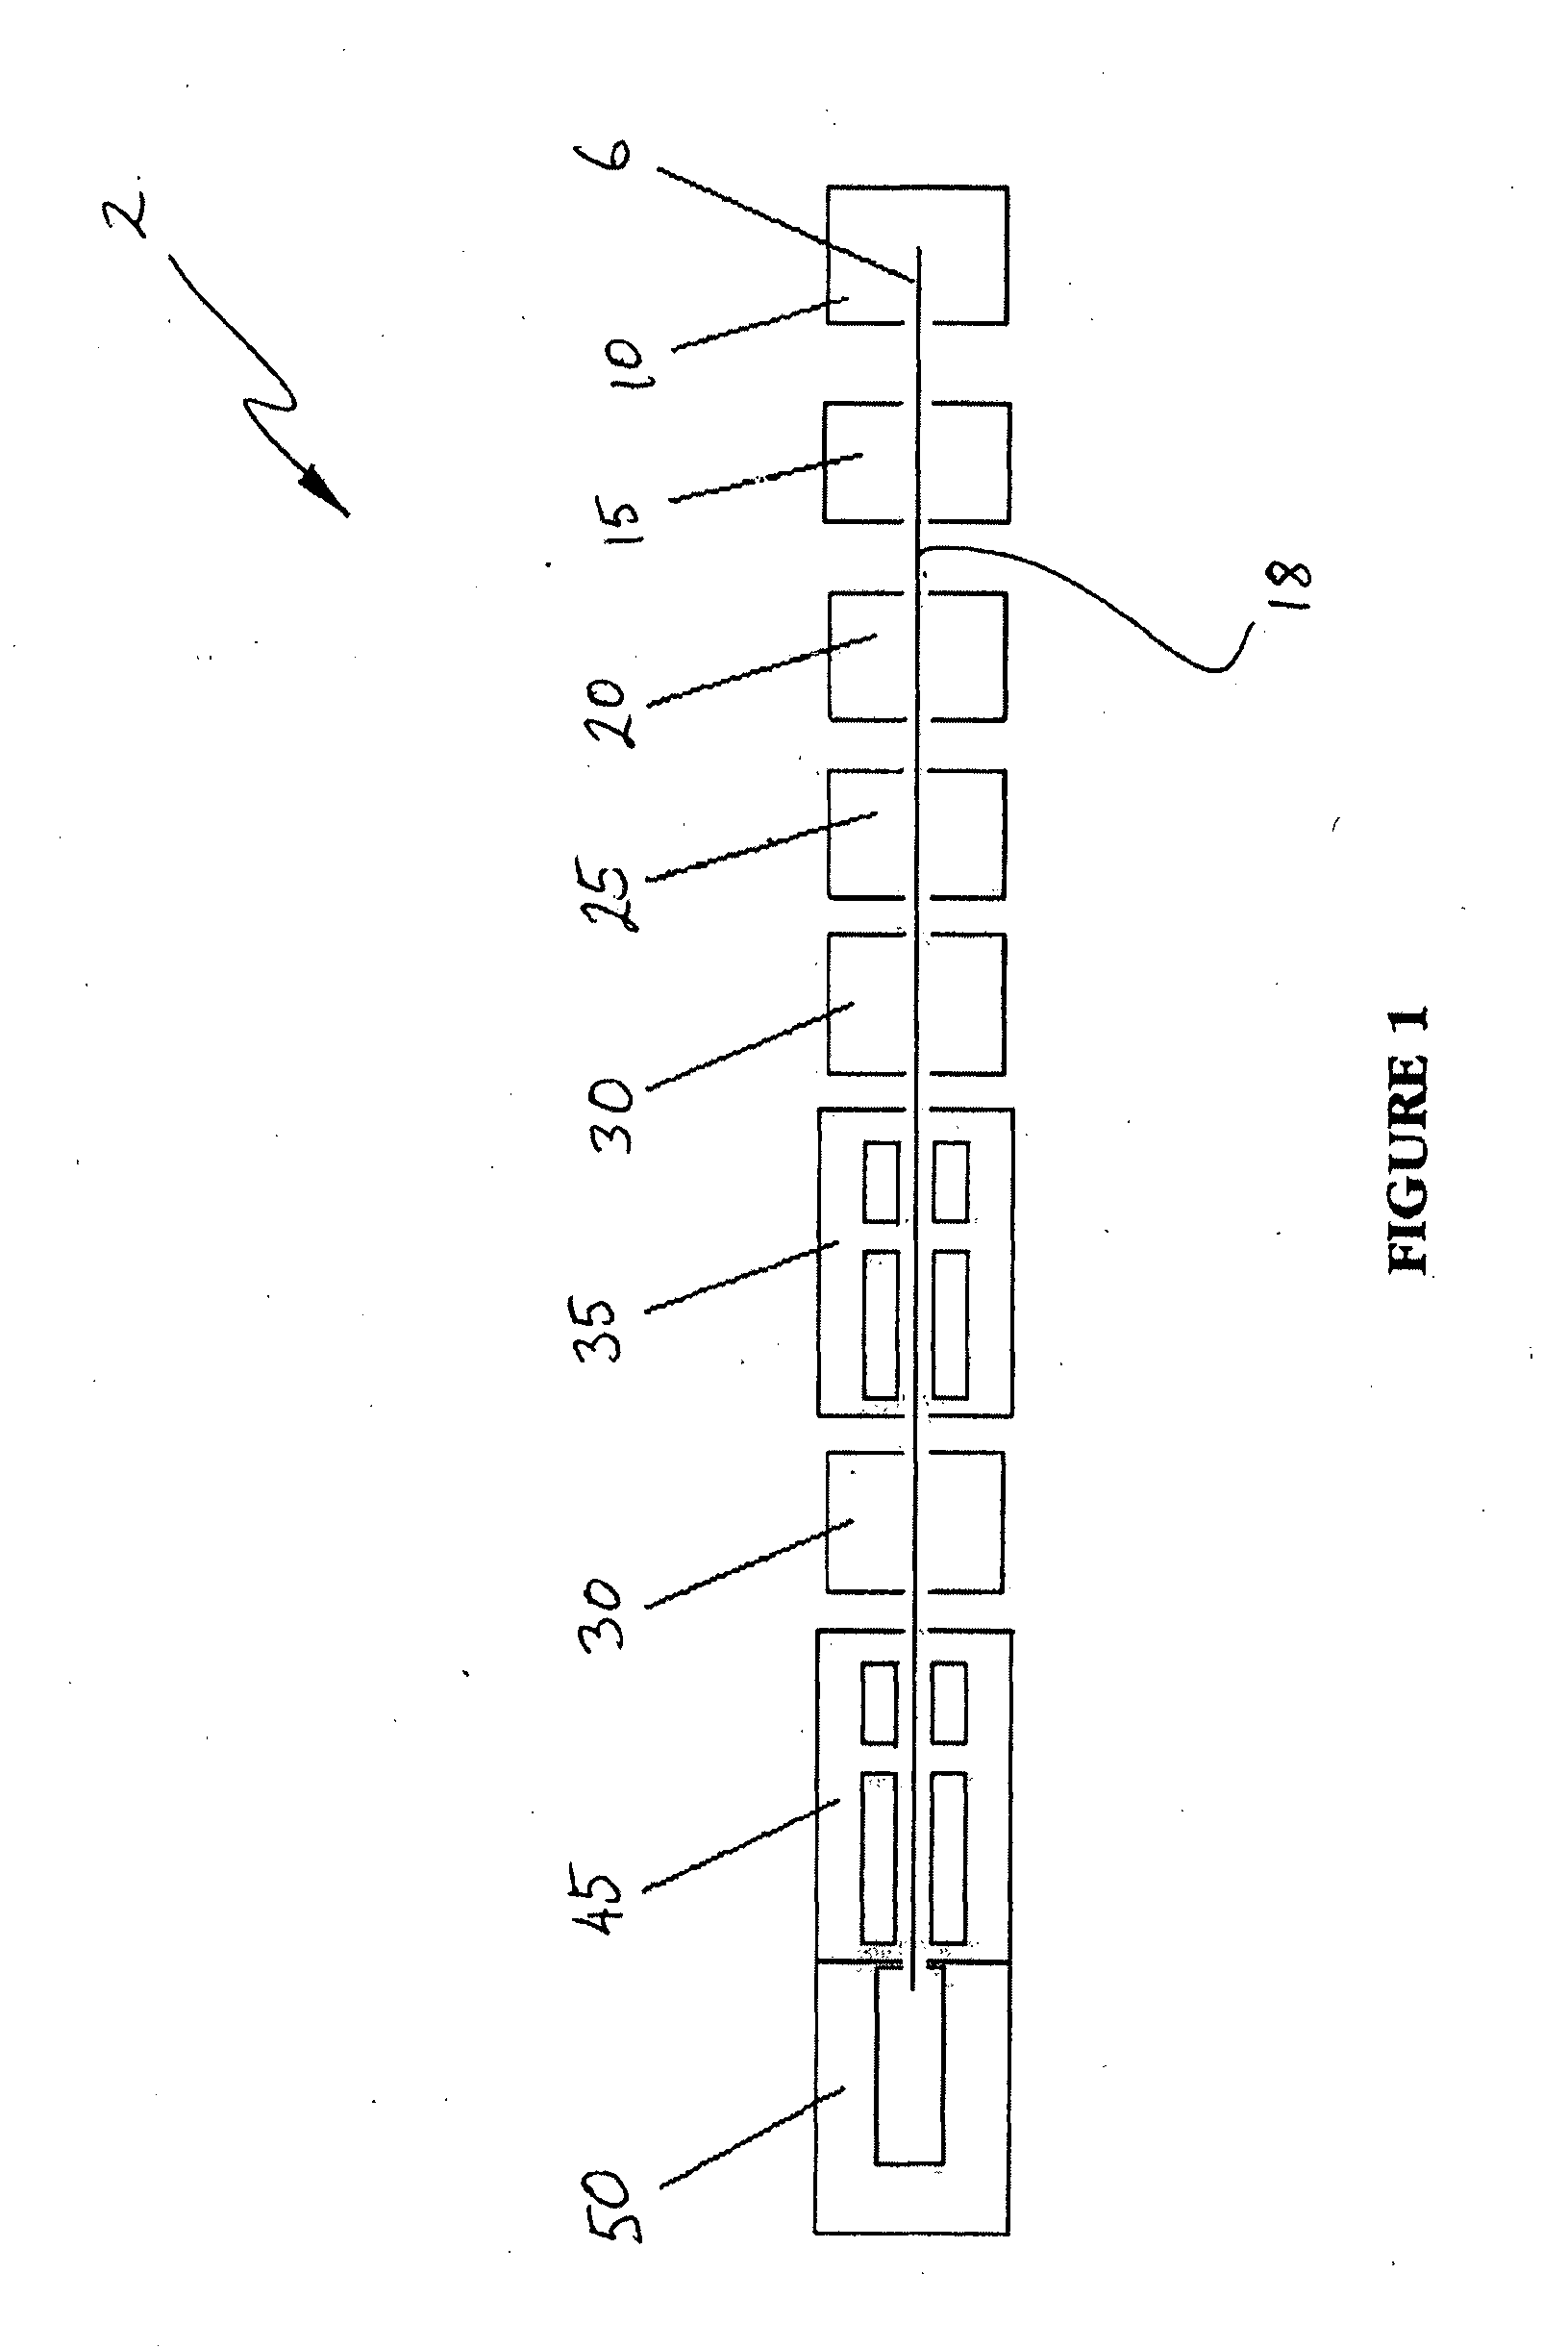 Interface for mass spectrometry apparatus